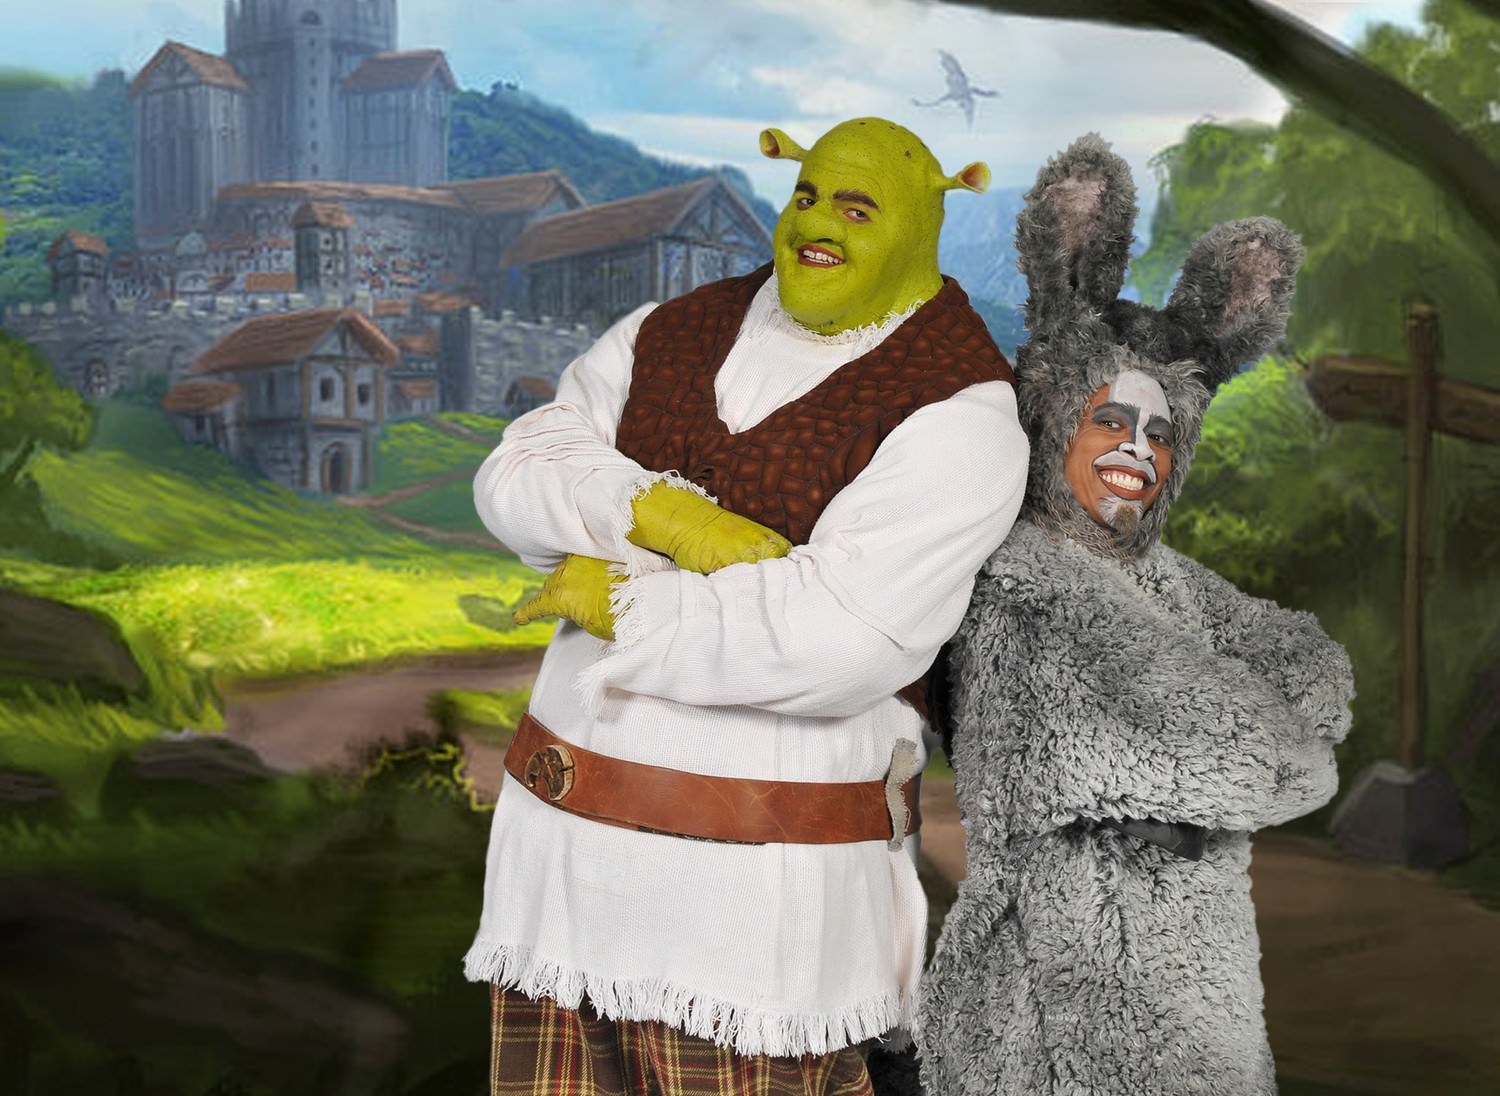 Here is a great shot of our Shrek (Trent Mills) and Donkey (Lawrence Cummings), wait until you see the whole cast in costume! 